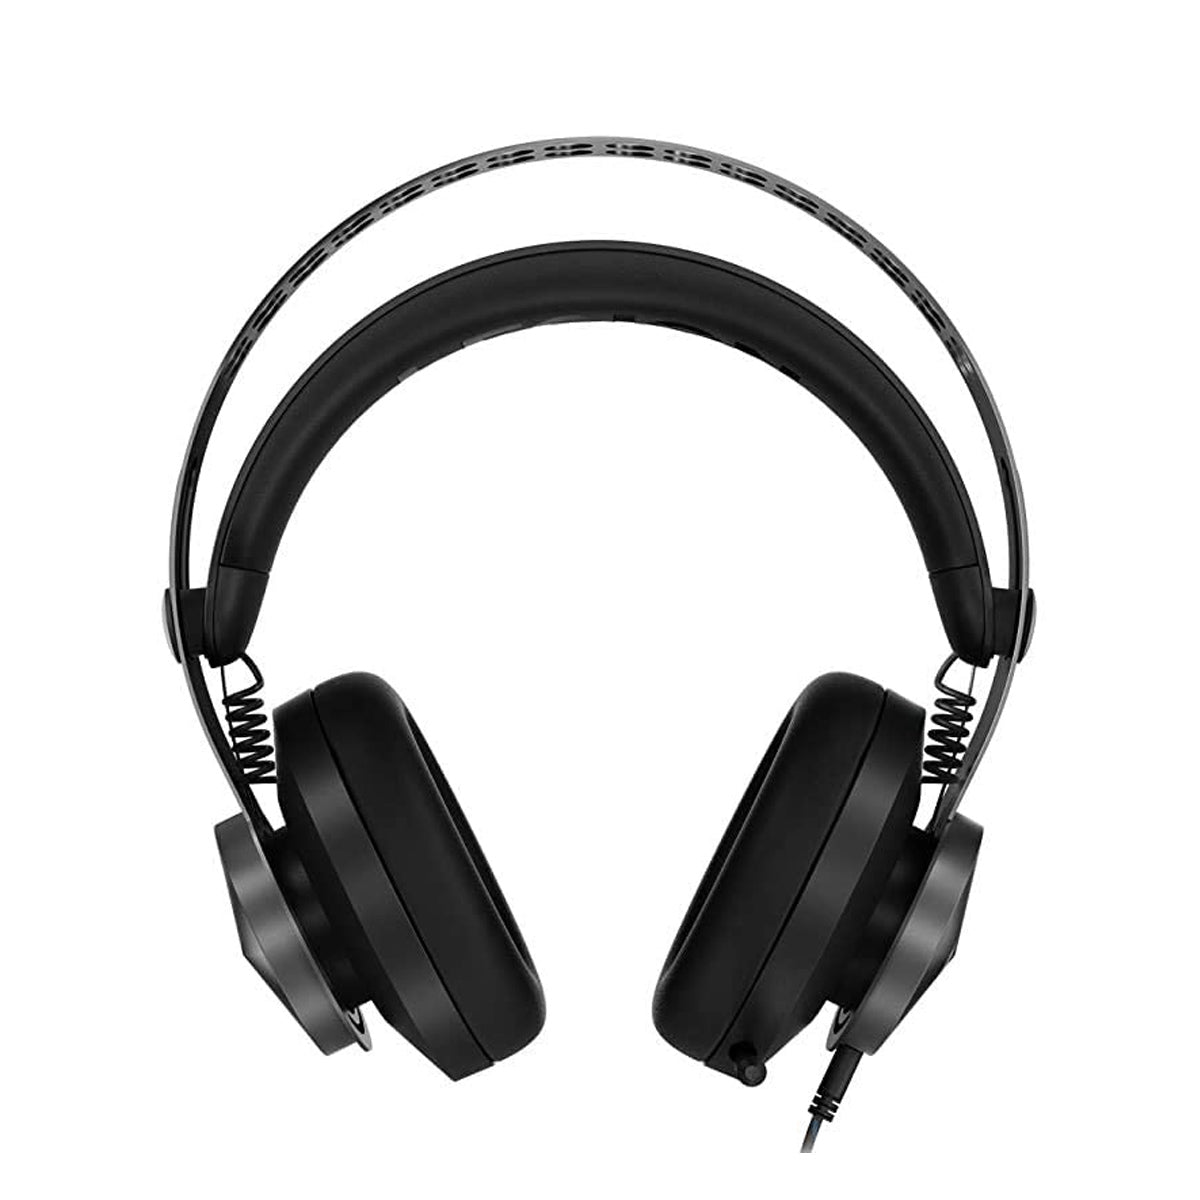 Lenovo Legion H500 PRO 7.1 Surround Sound Gaming Headset with Noise-Cancelling Mic